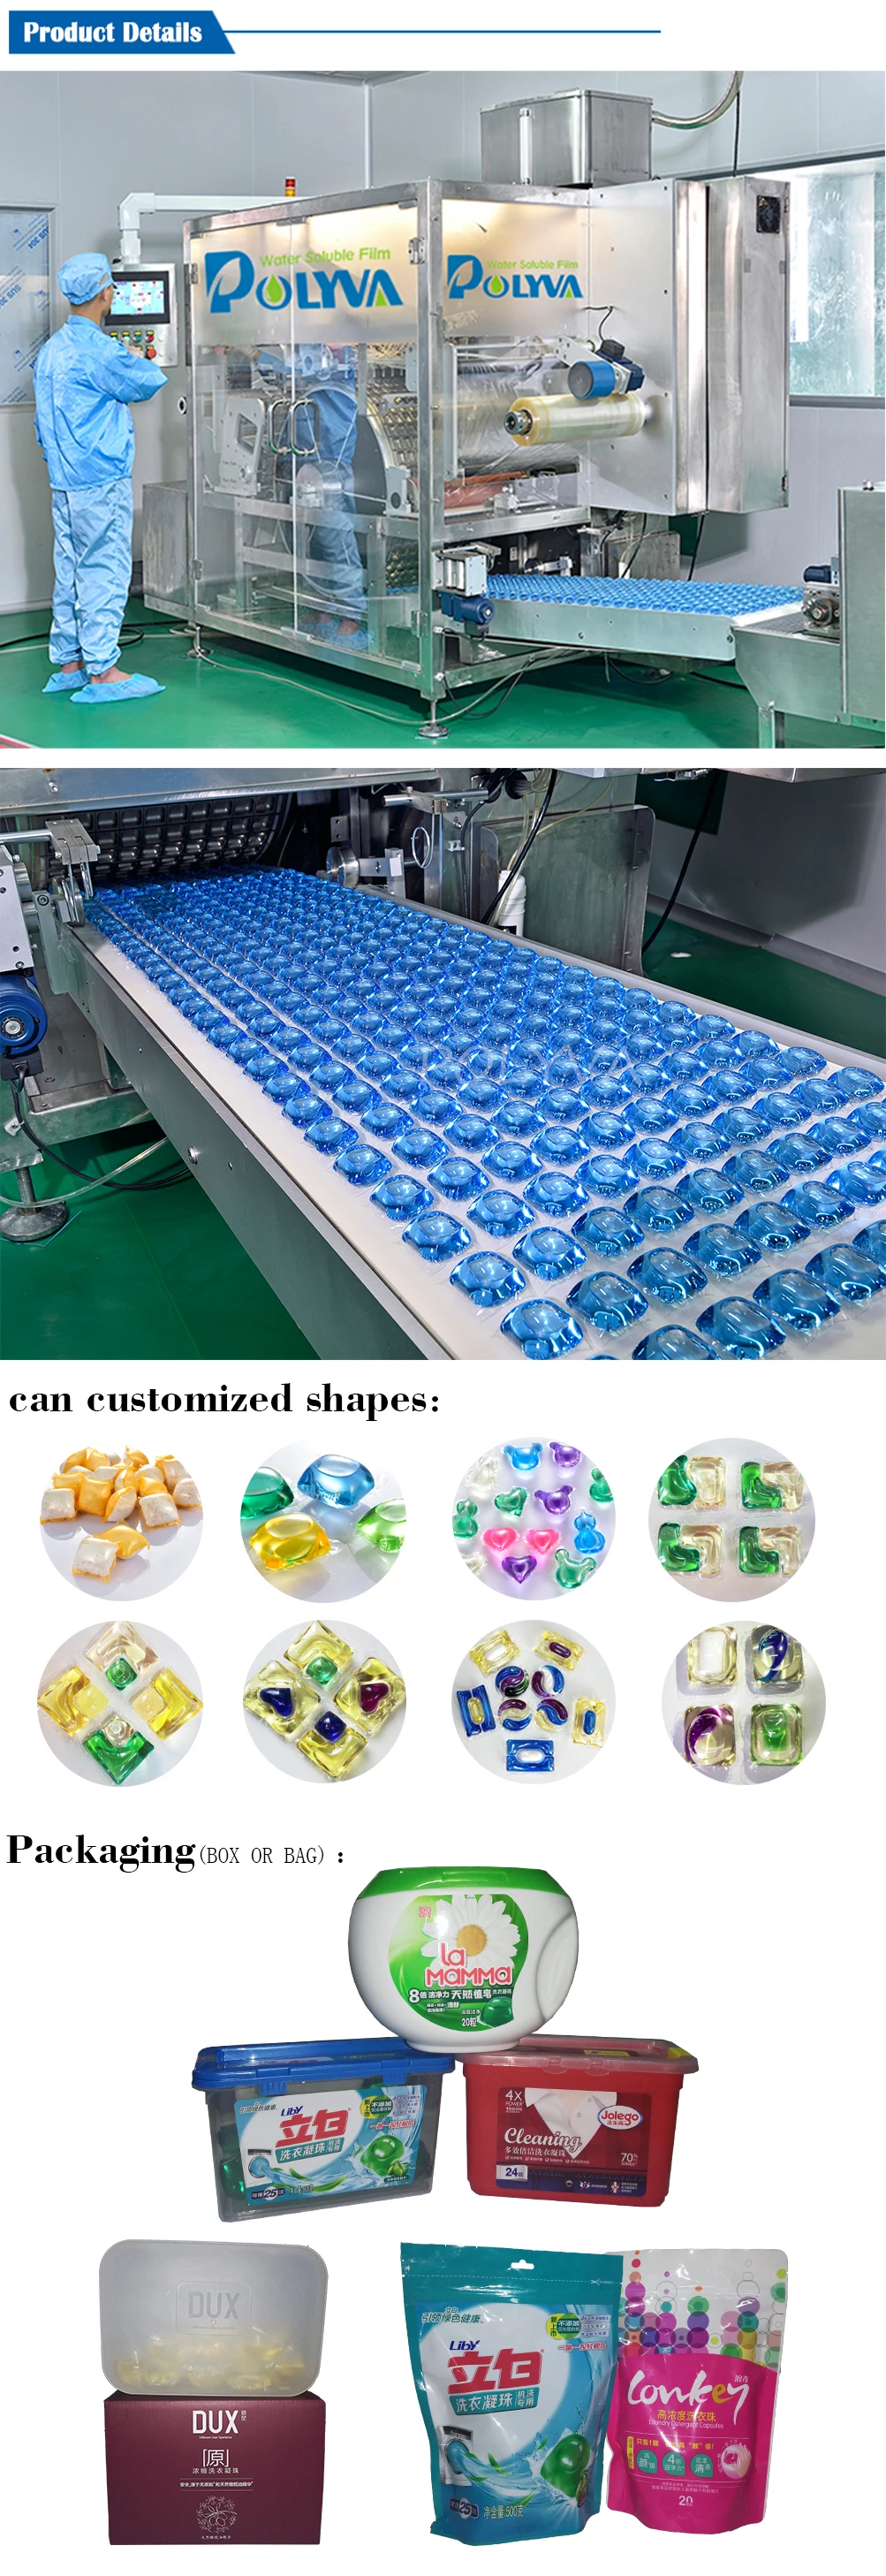 water soluble film concentrated laundry liquid pods